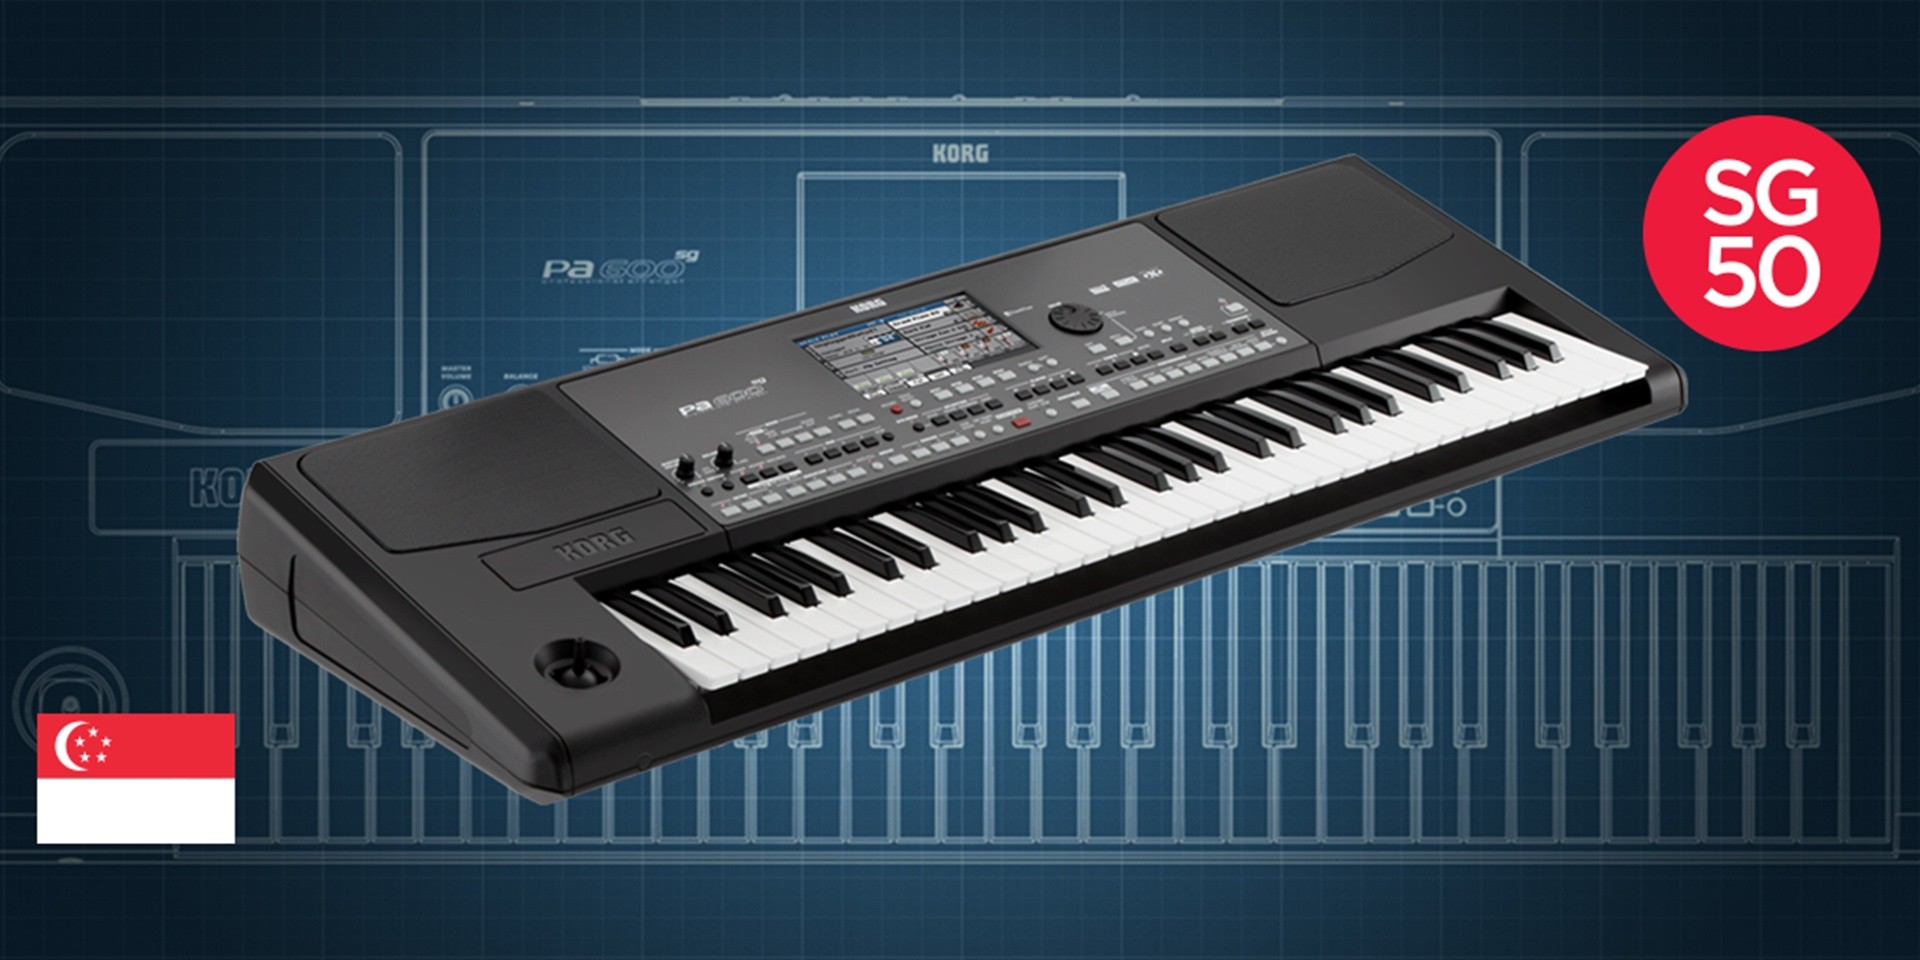 Korg has customized a musical keyboard for Singapore